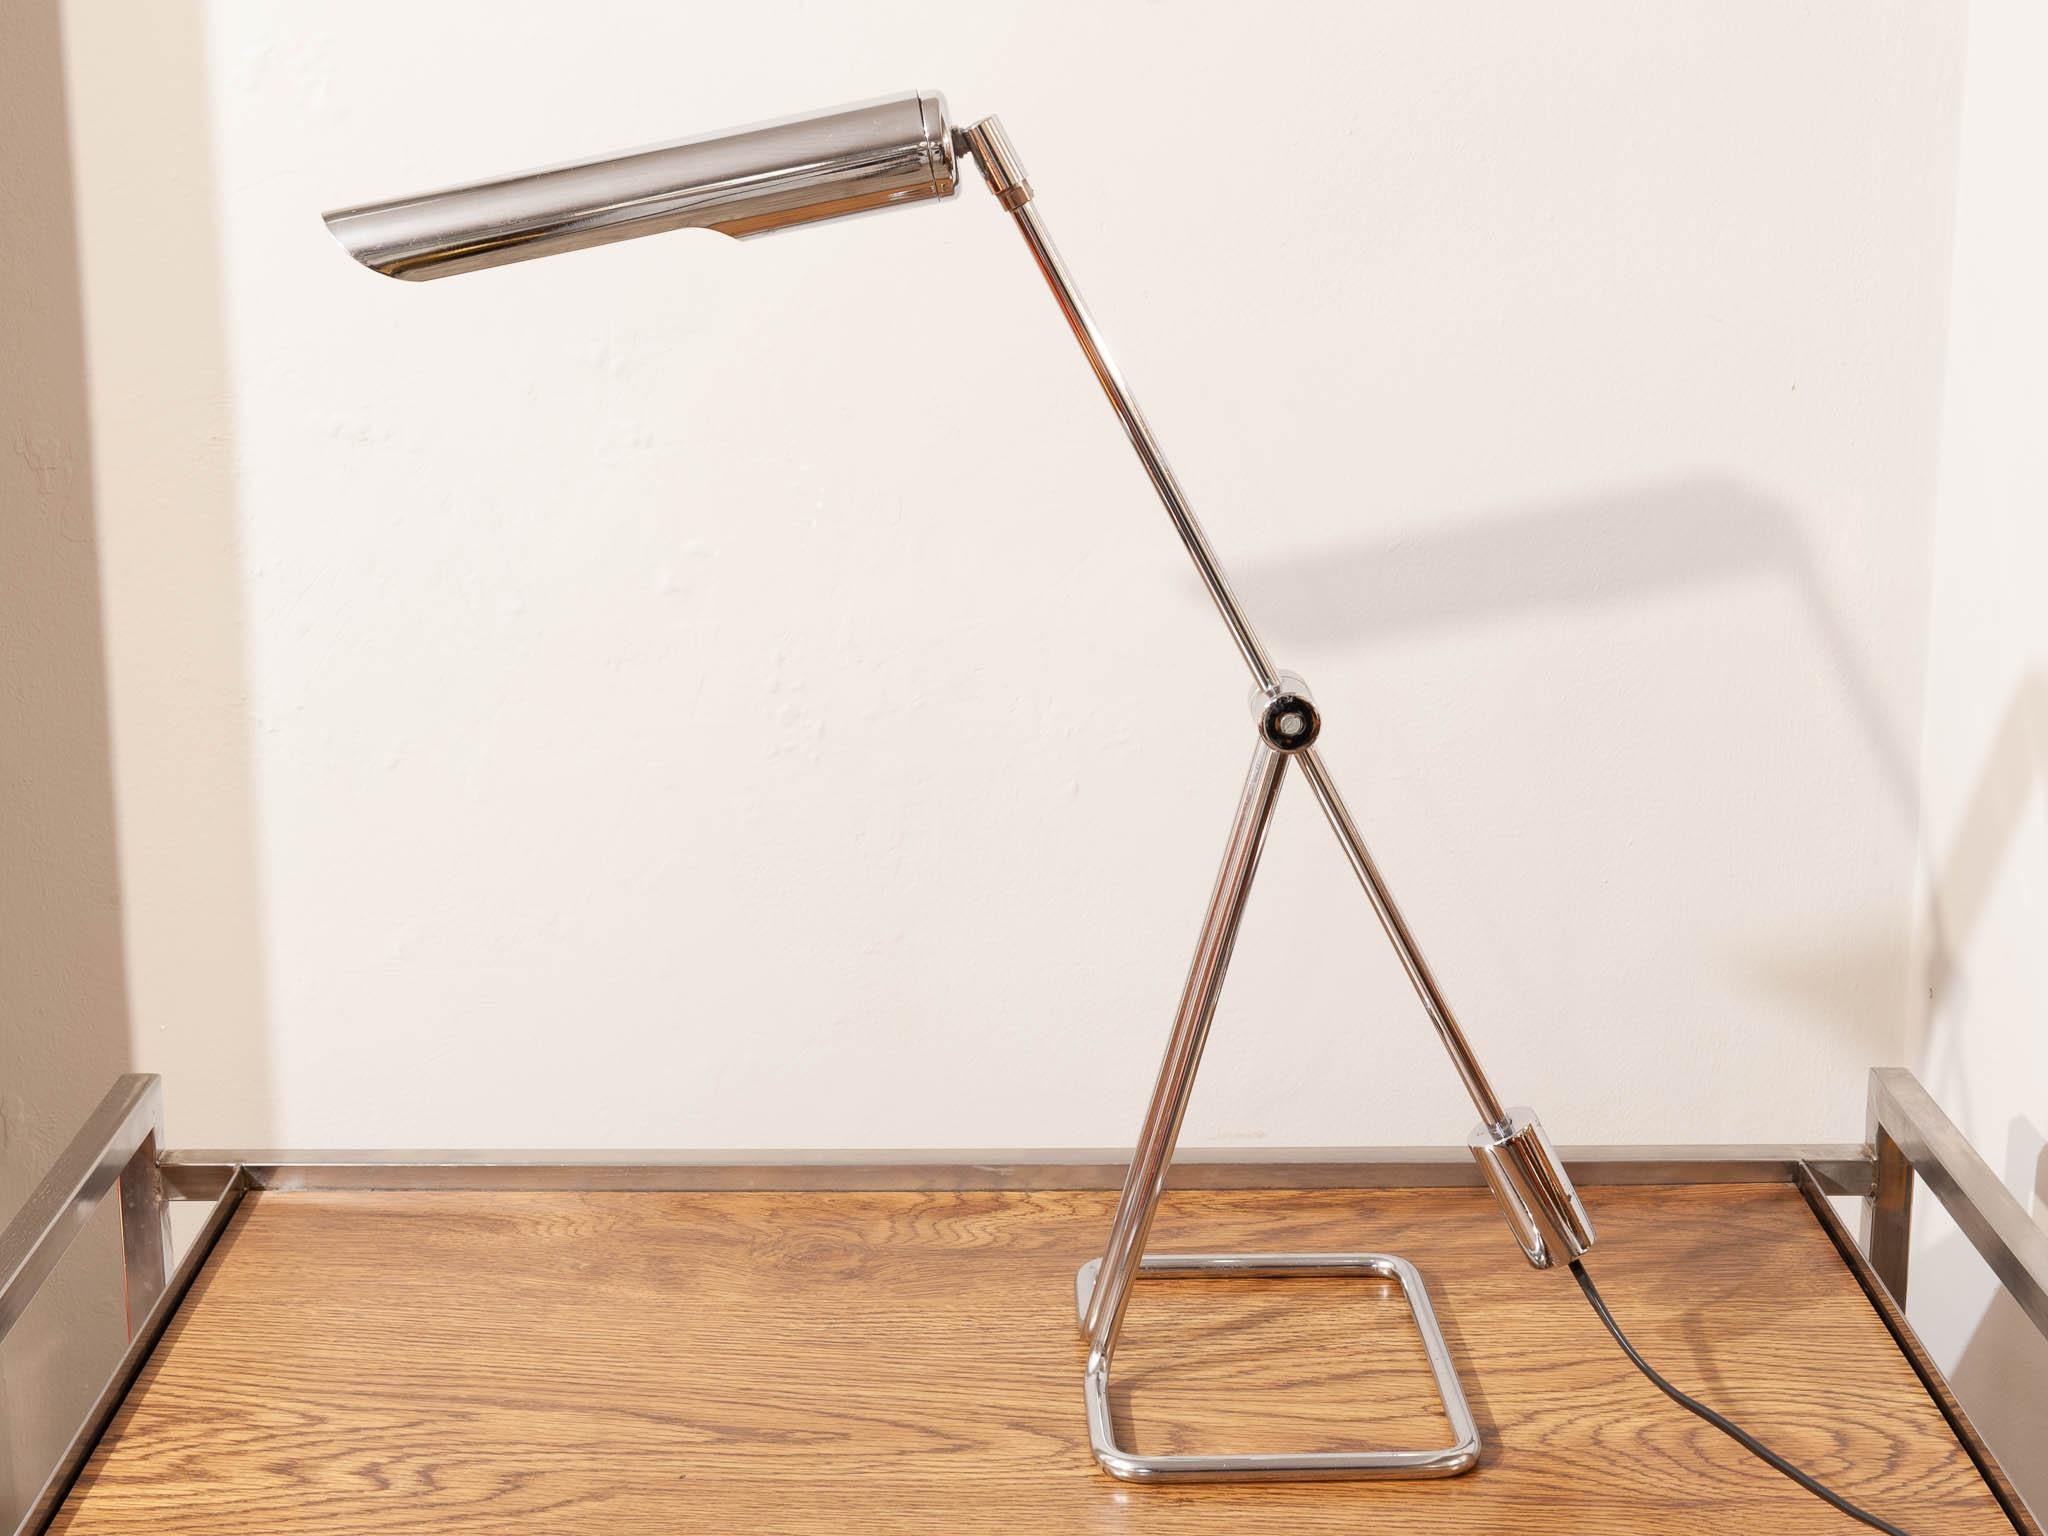 1970s Danish minimalist desk light designed by Abo Randers. As you can see from the images the lamp is adjustable in many different ways due to its simple but clever design. The light is chrome plated with a rectangular formed tubular base which